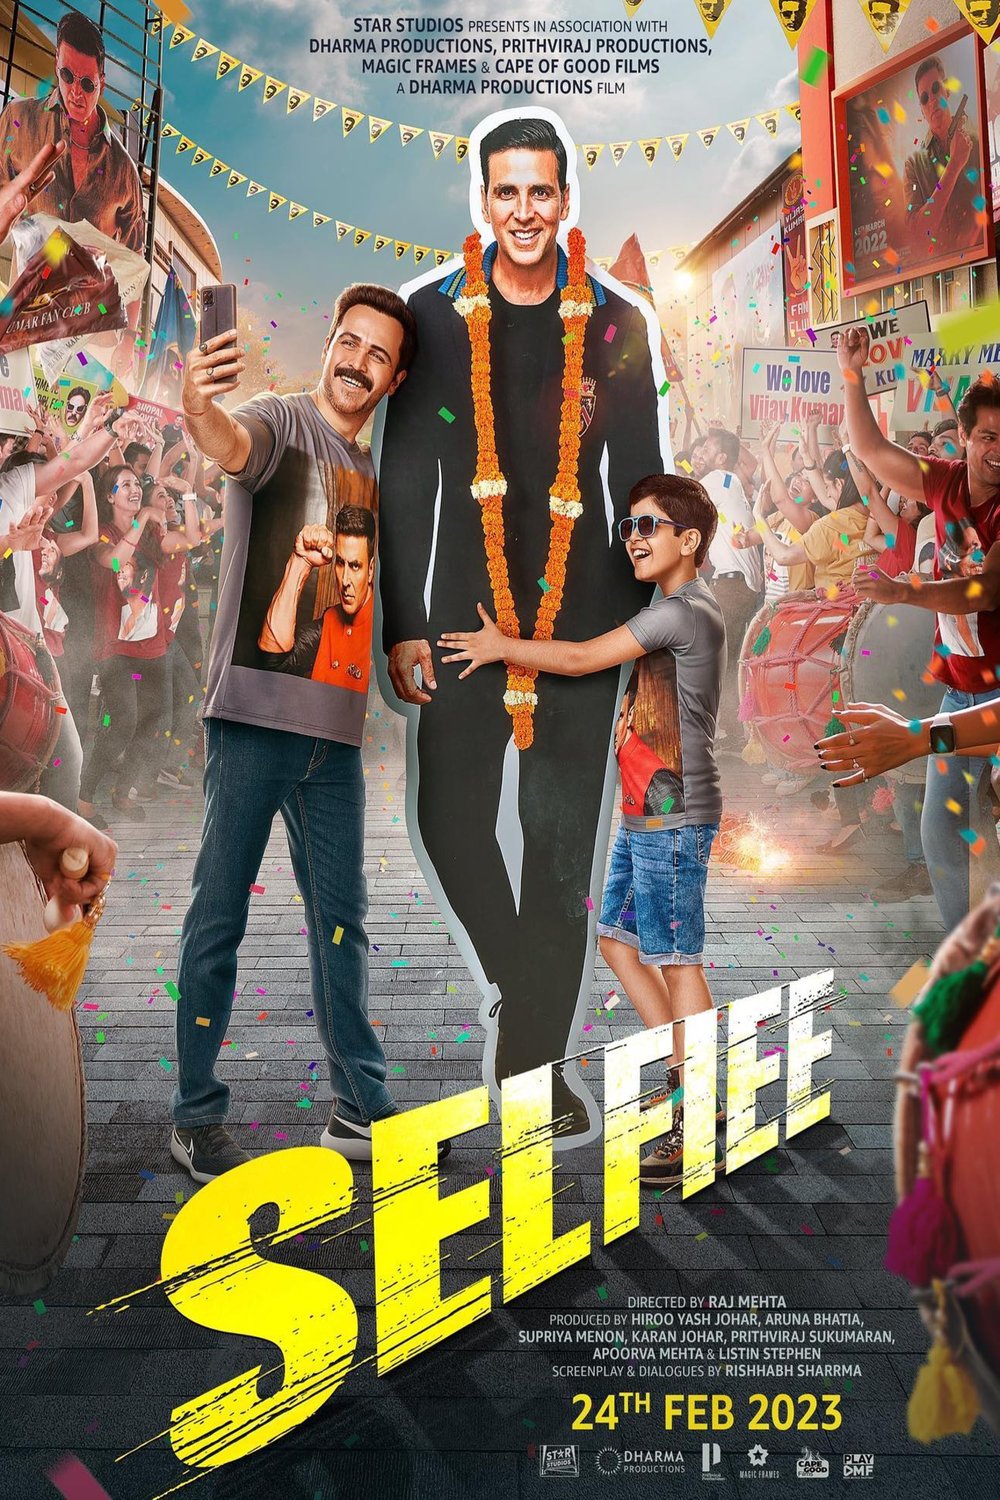 Hindi poster of the movie Selfiee